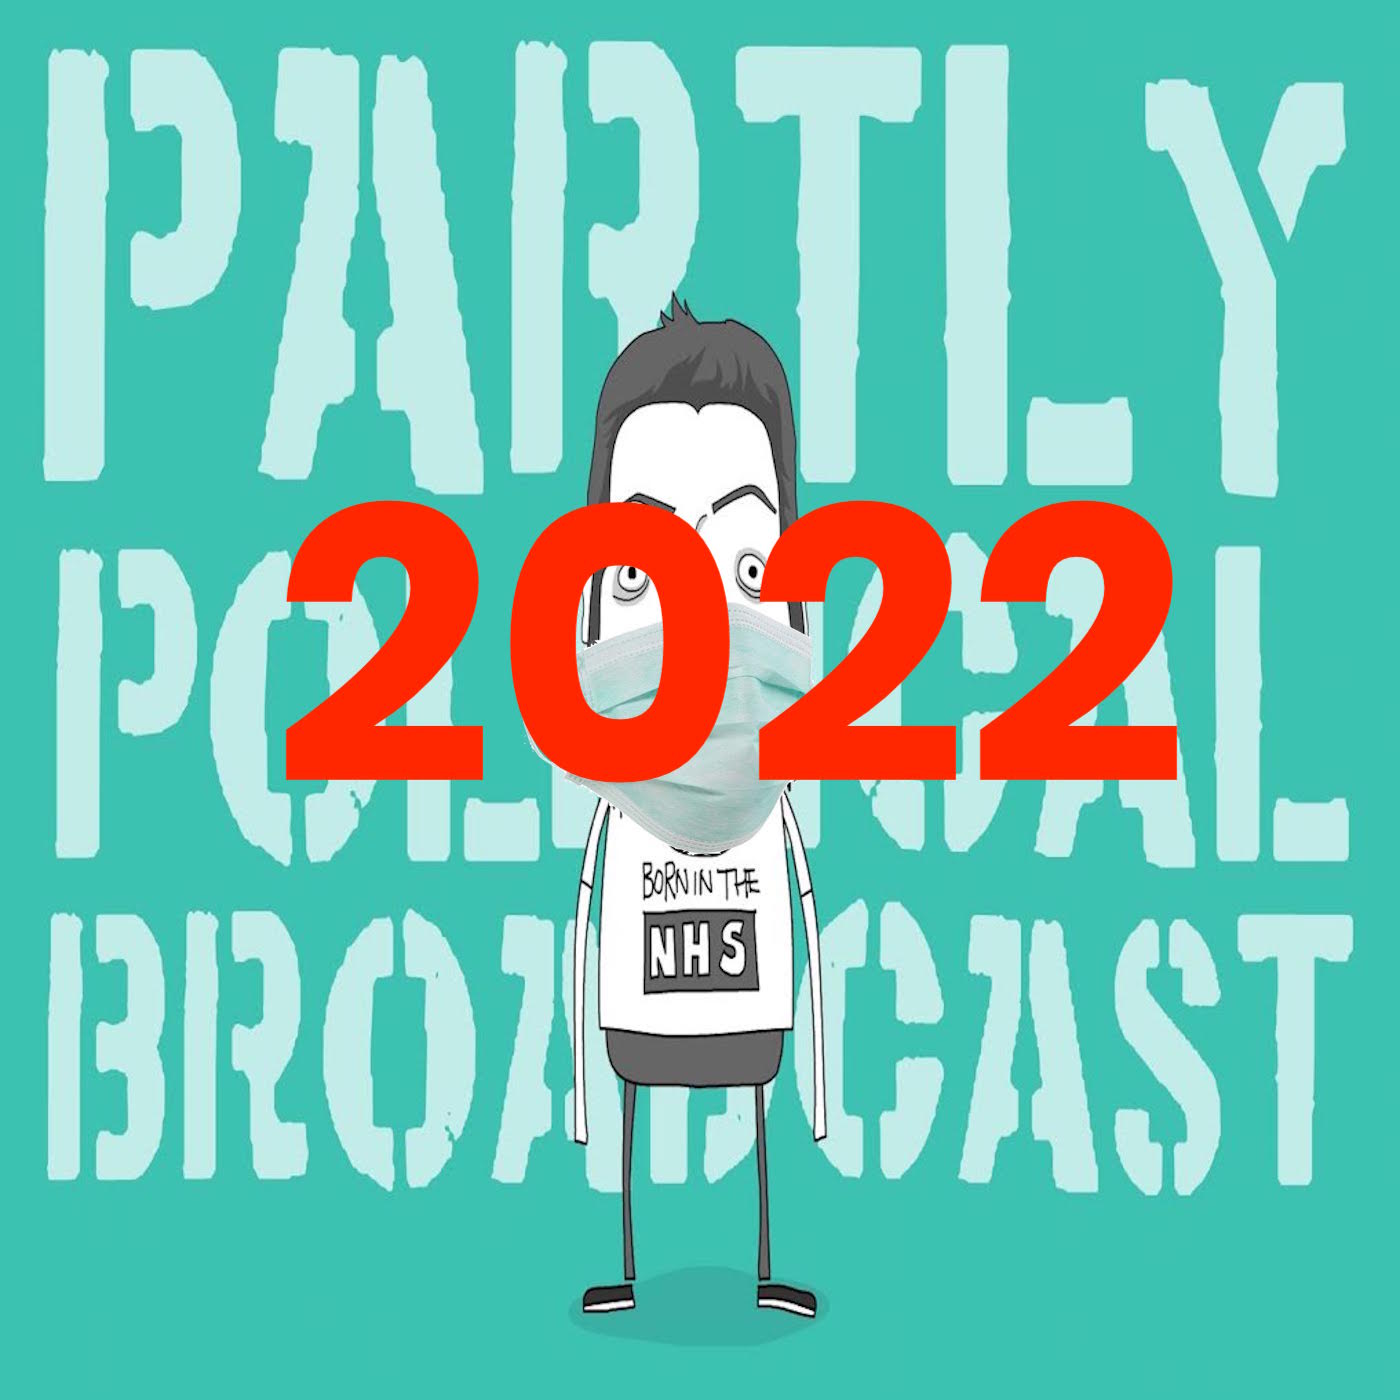 Newstradamus 2022! The resident ParPolBro chairvoyant returns to give predictions on the year ahead